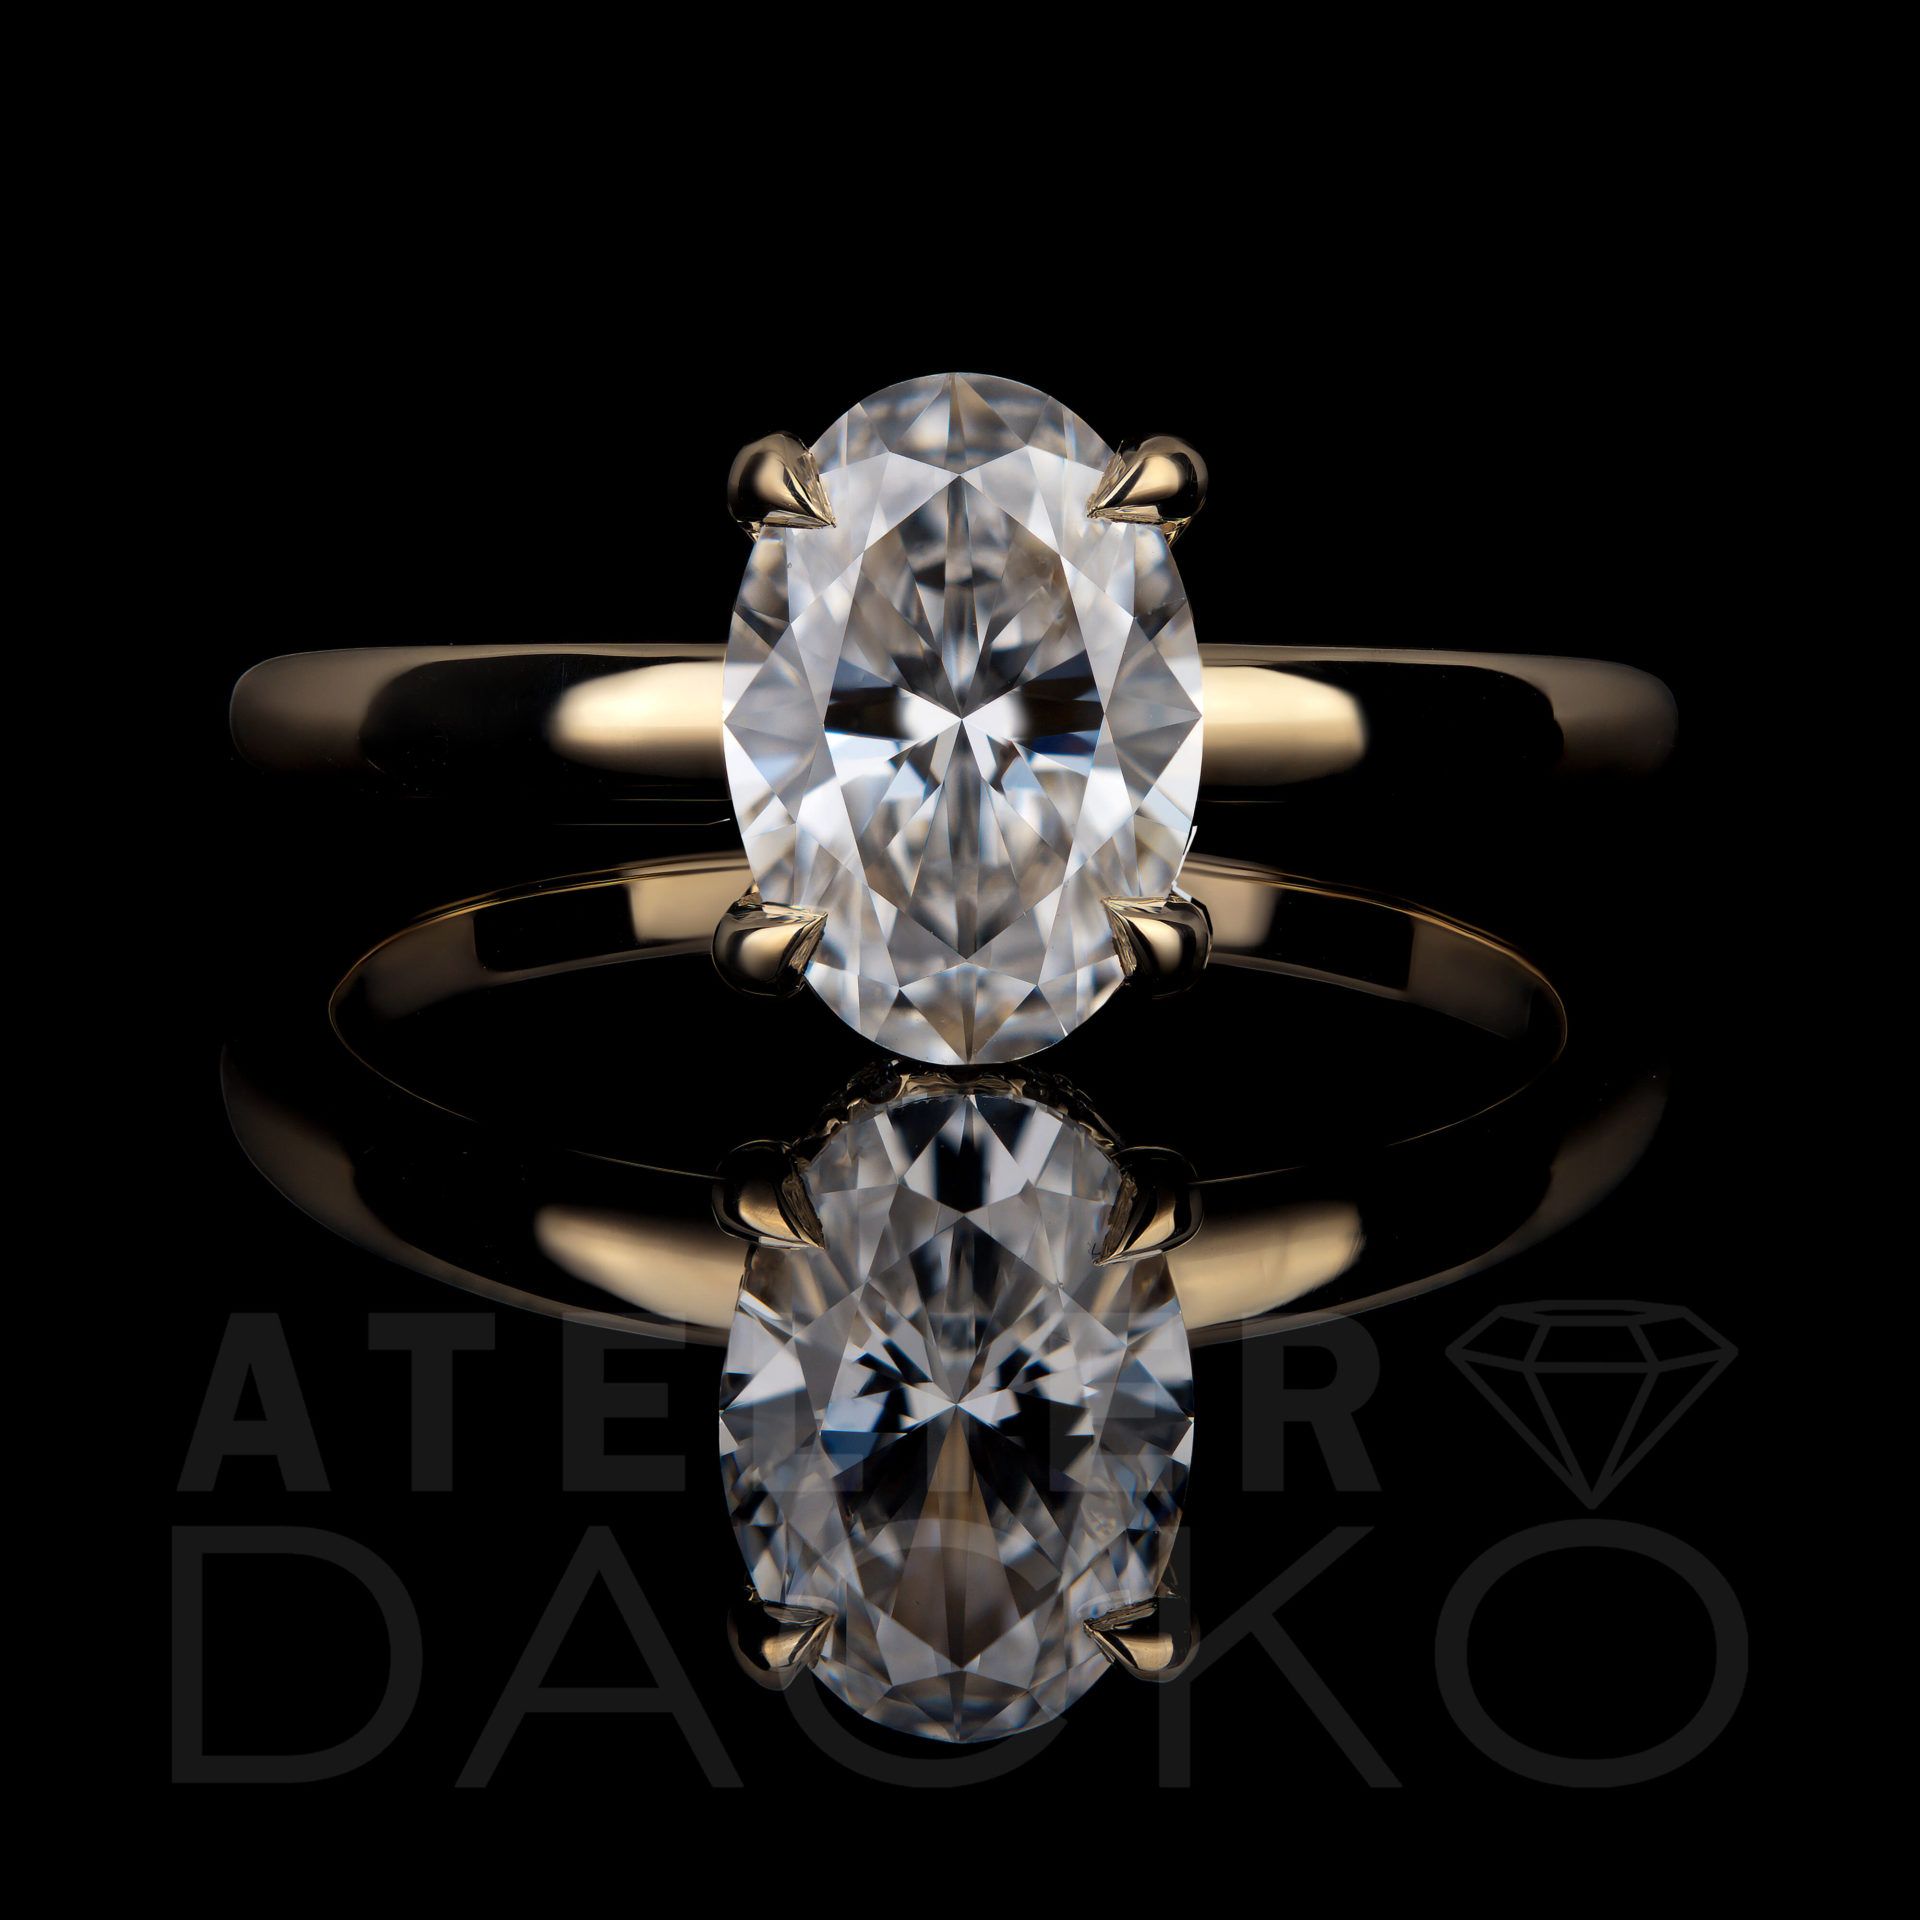 AD016 - 1.20 CT Solitaire Oval Diamond with Hidden Halo - 1